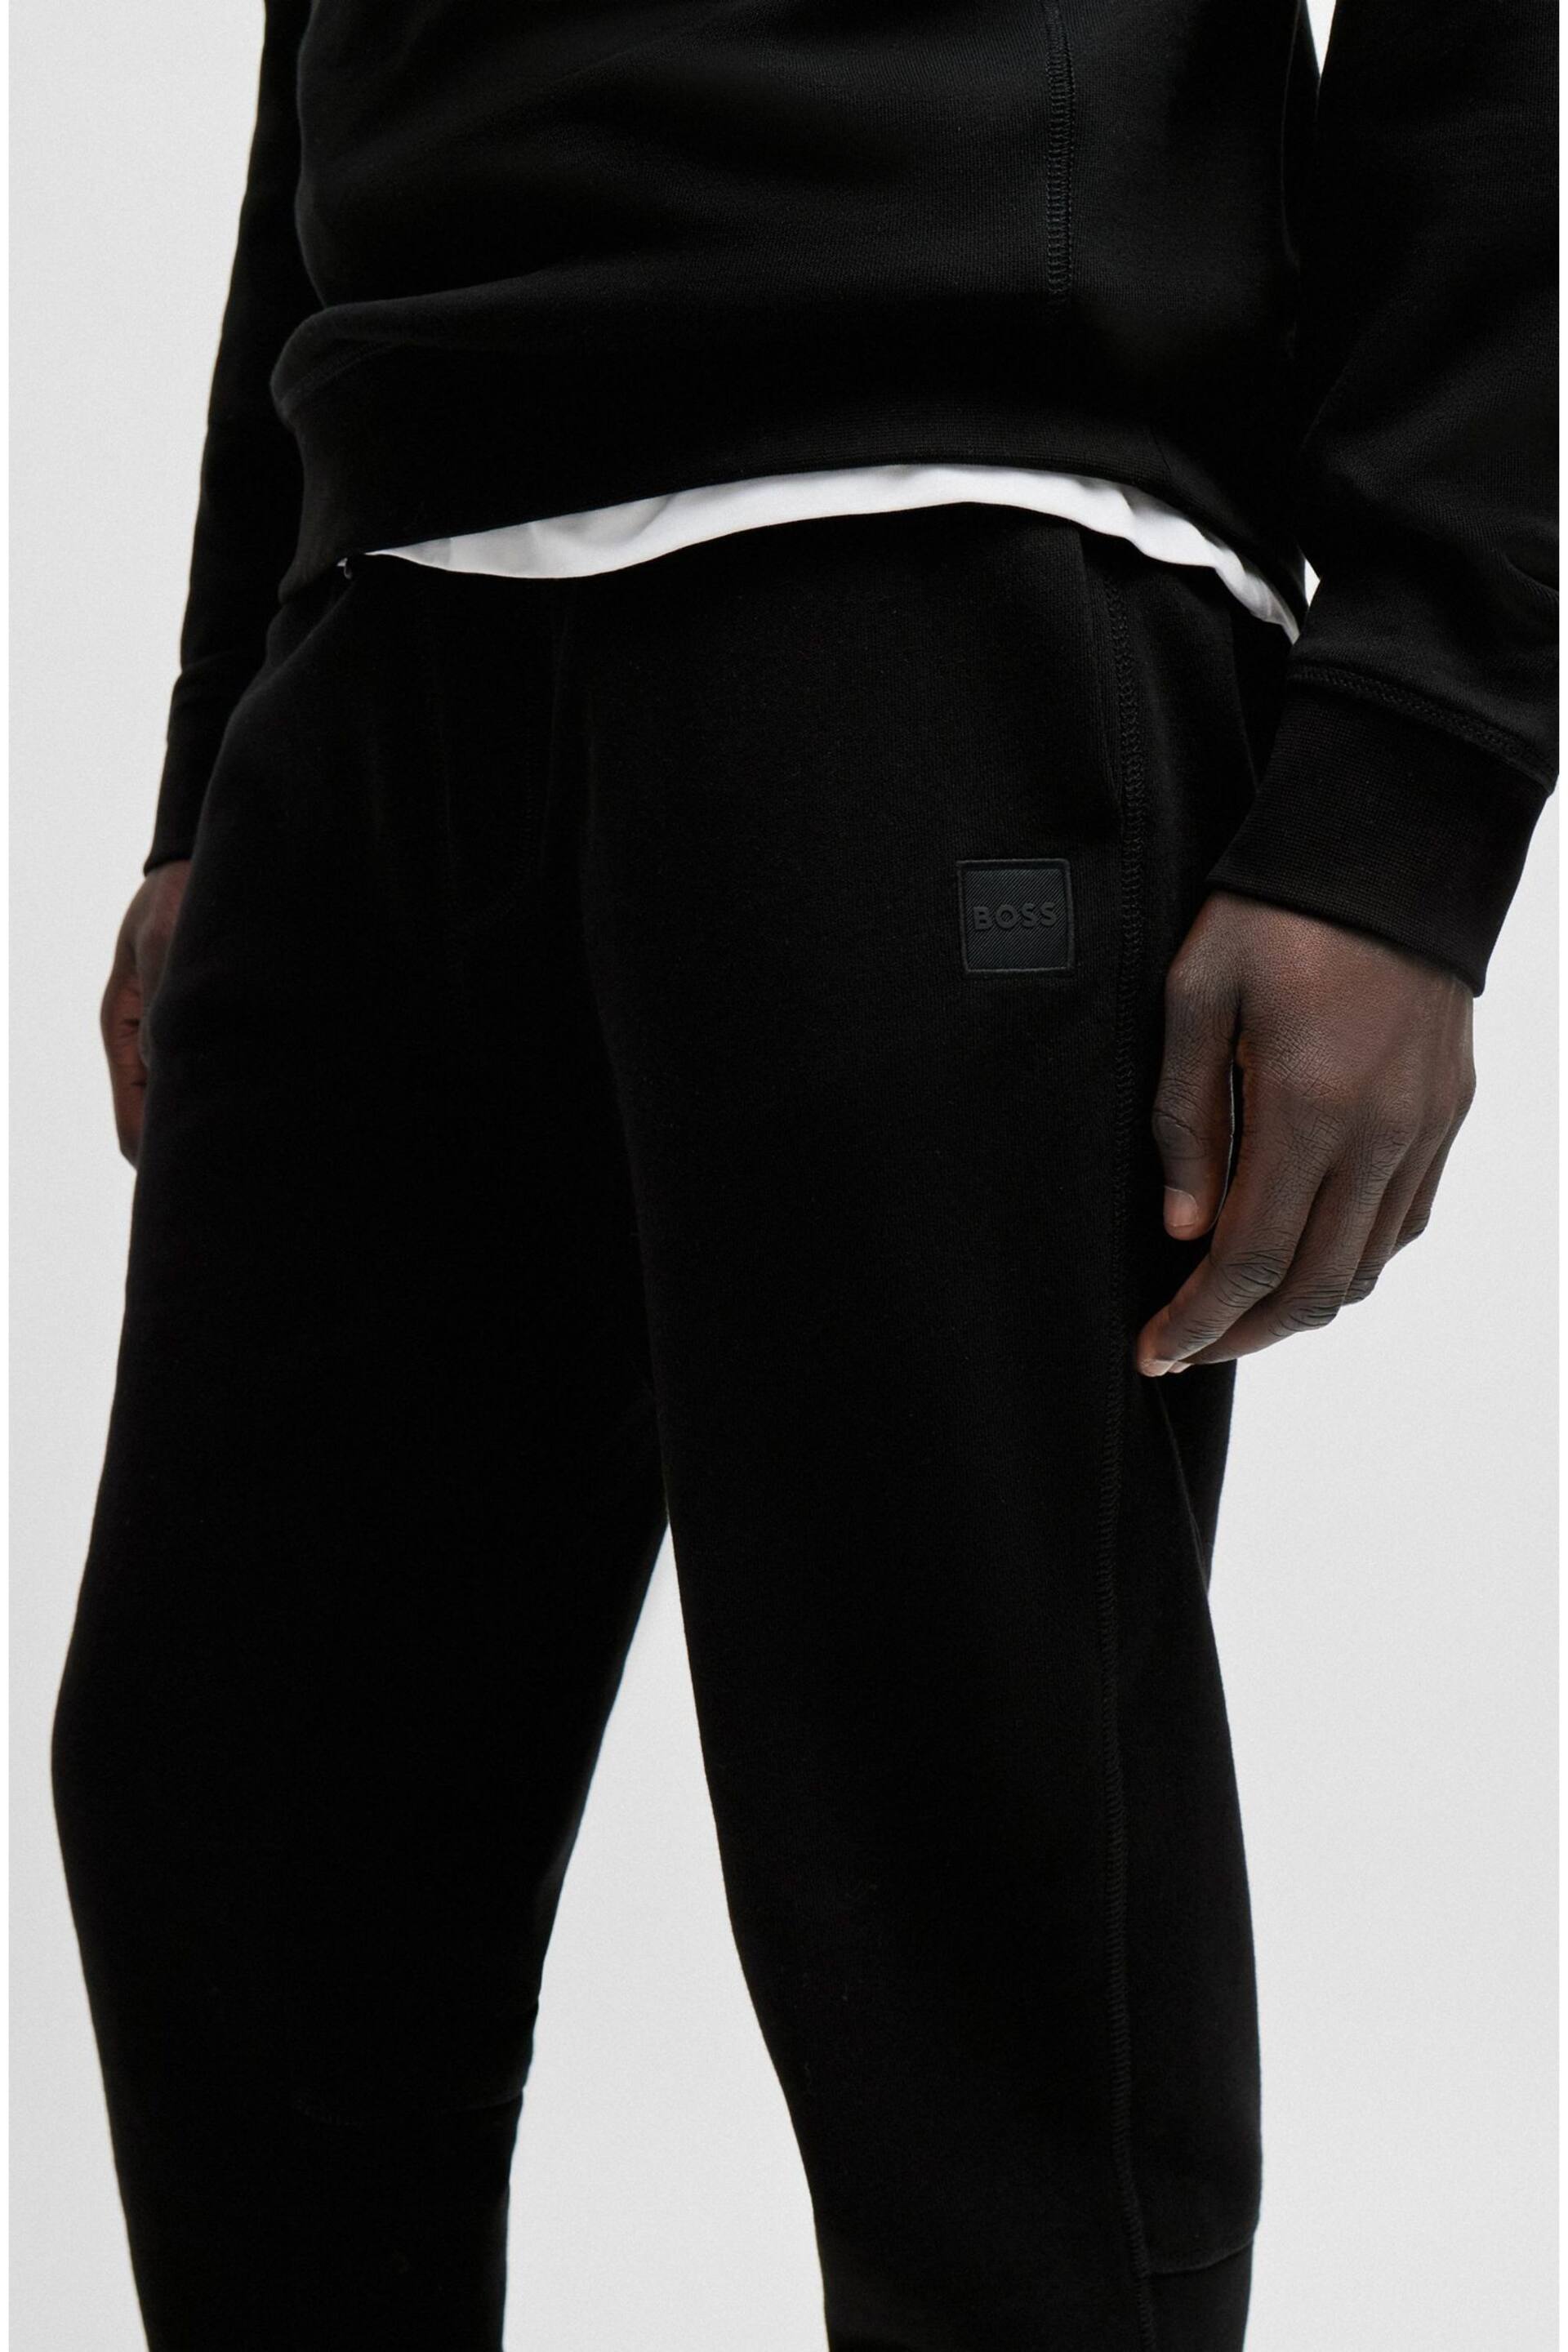 BOSS Black Logo Patch Cotton Terry Joggers - Image 4 of 6